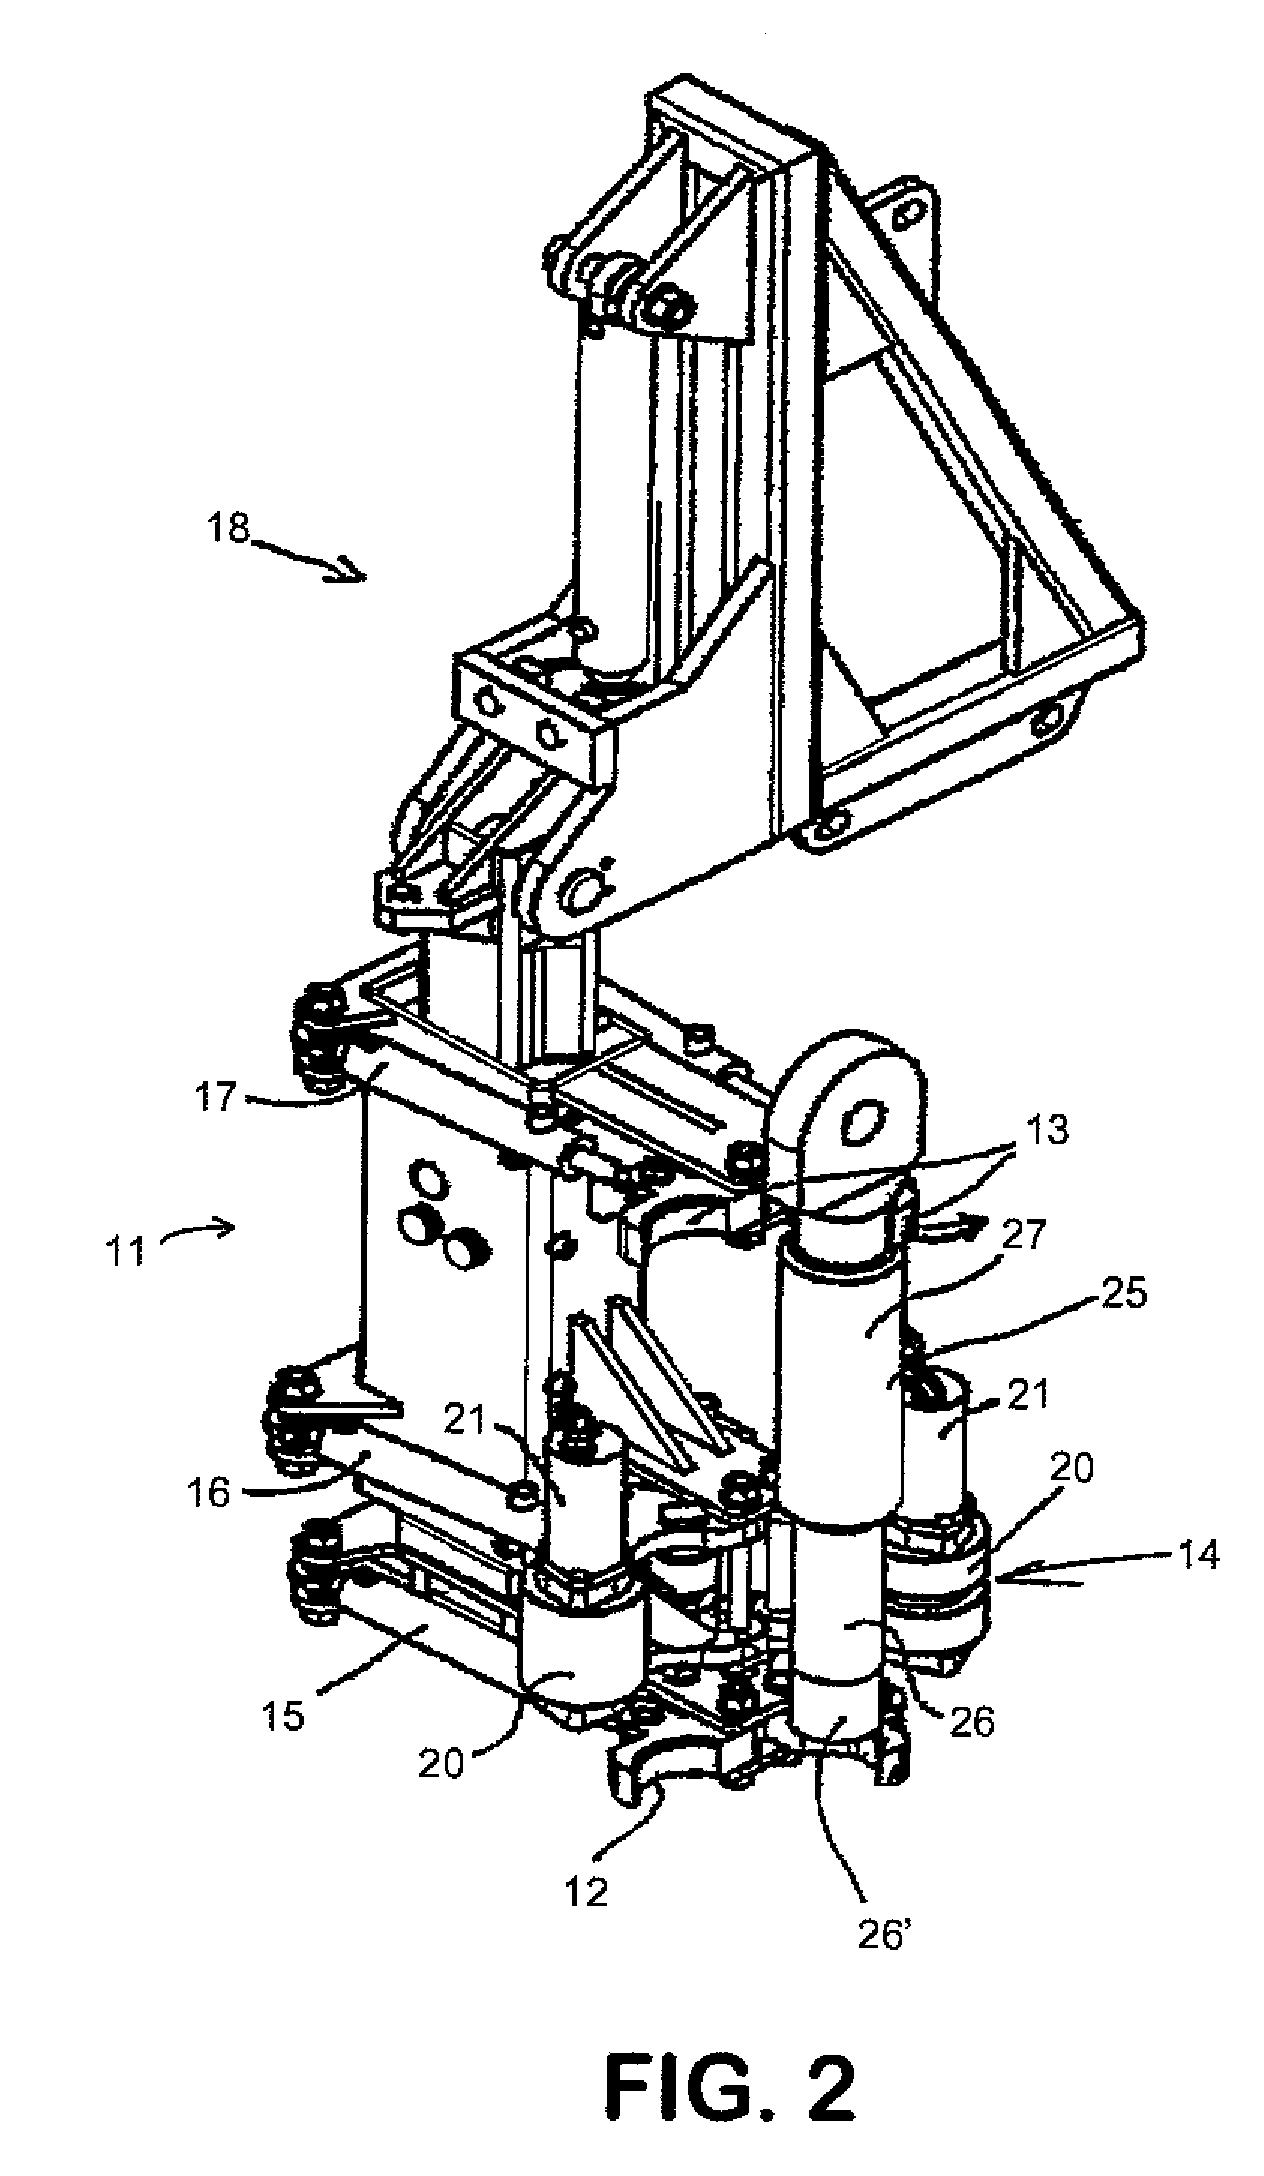 Device and method for handling drill string components, as well as rock drilling rig